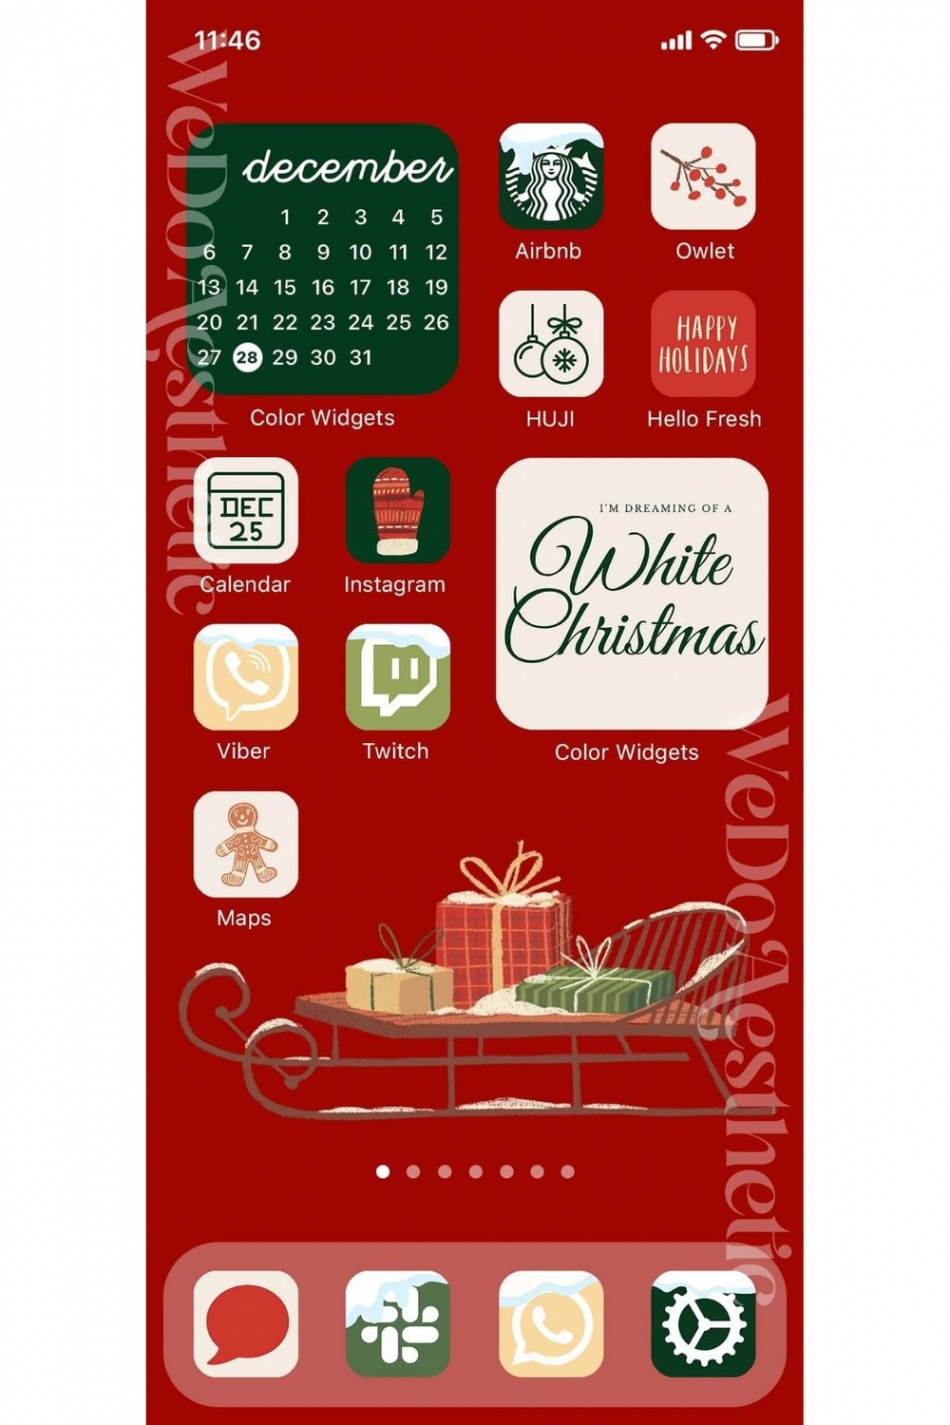 Vintage Christmas IOS Aesthetic - App icons & Wallpapers Bundle